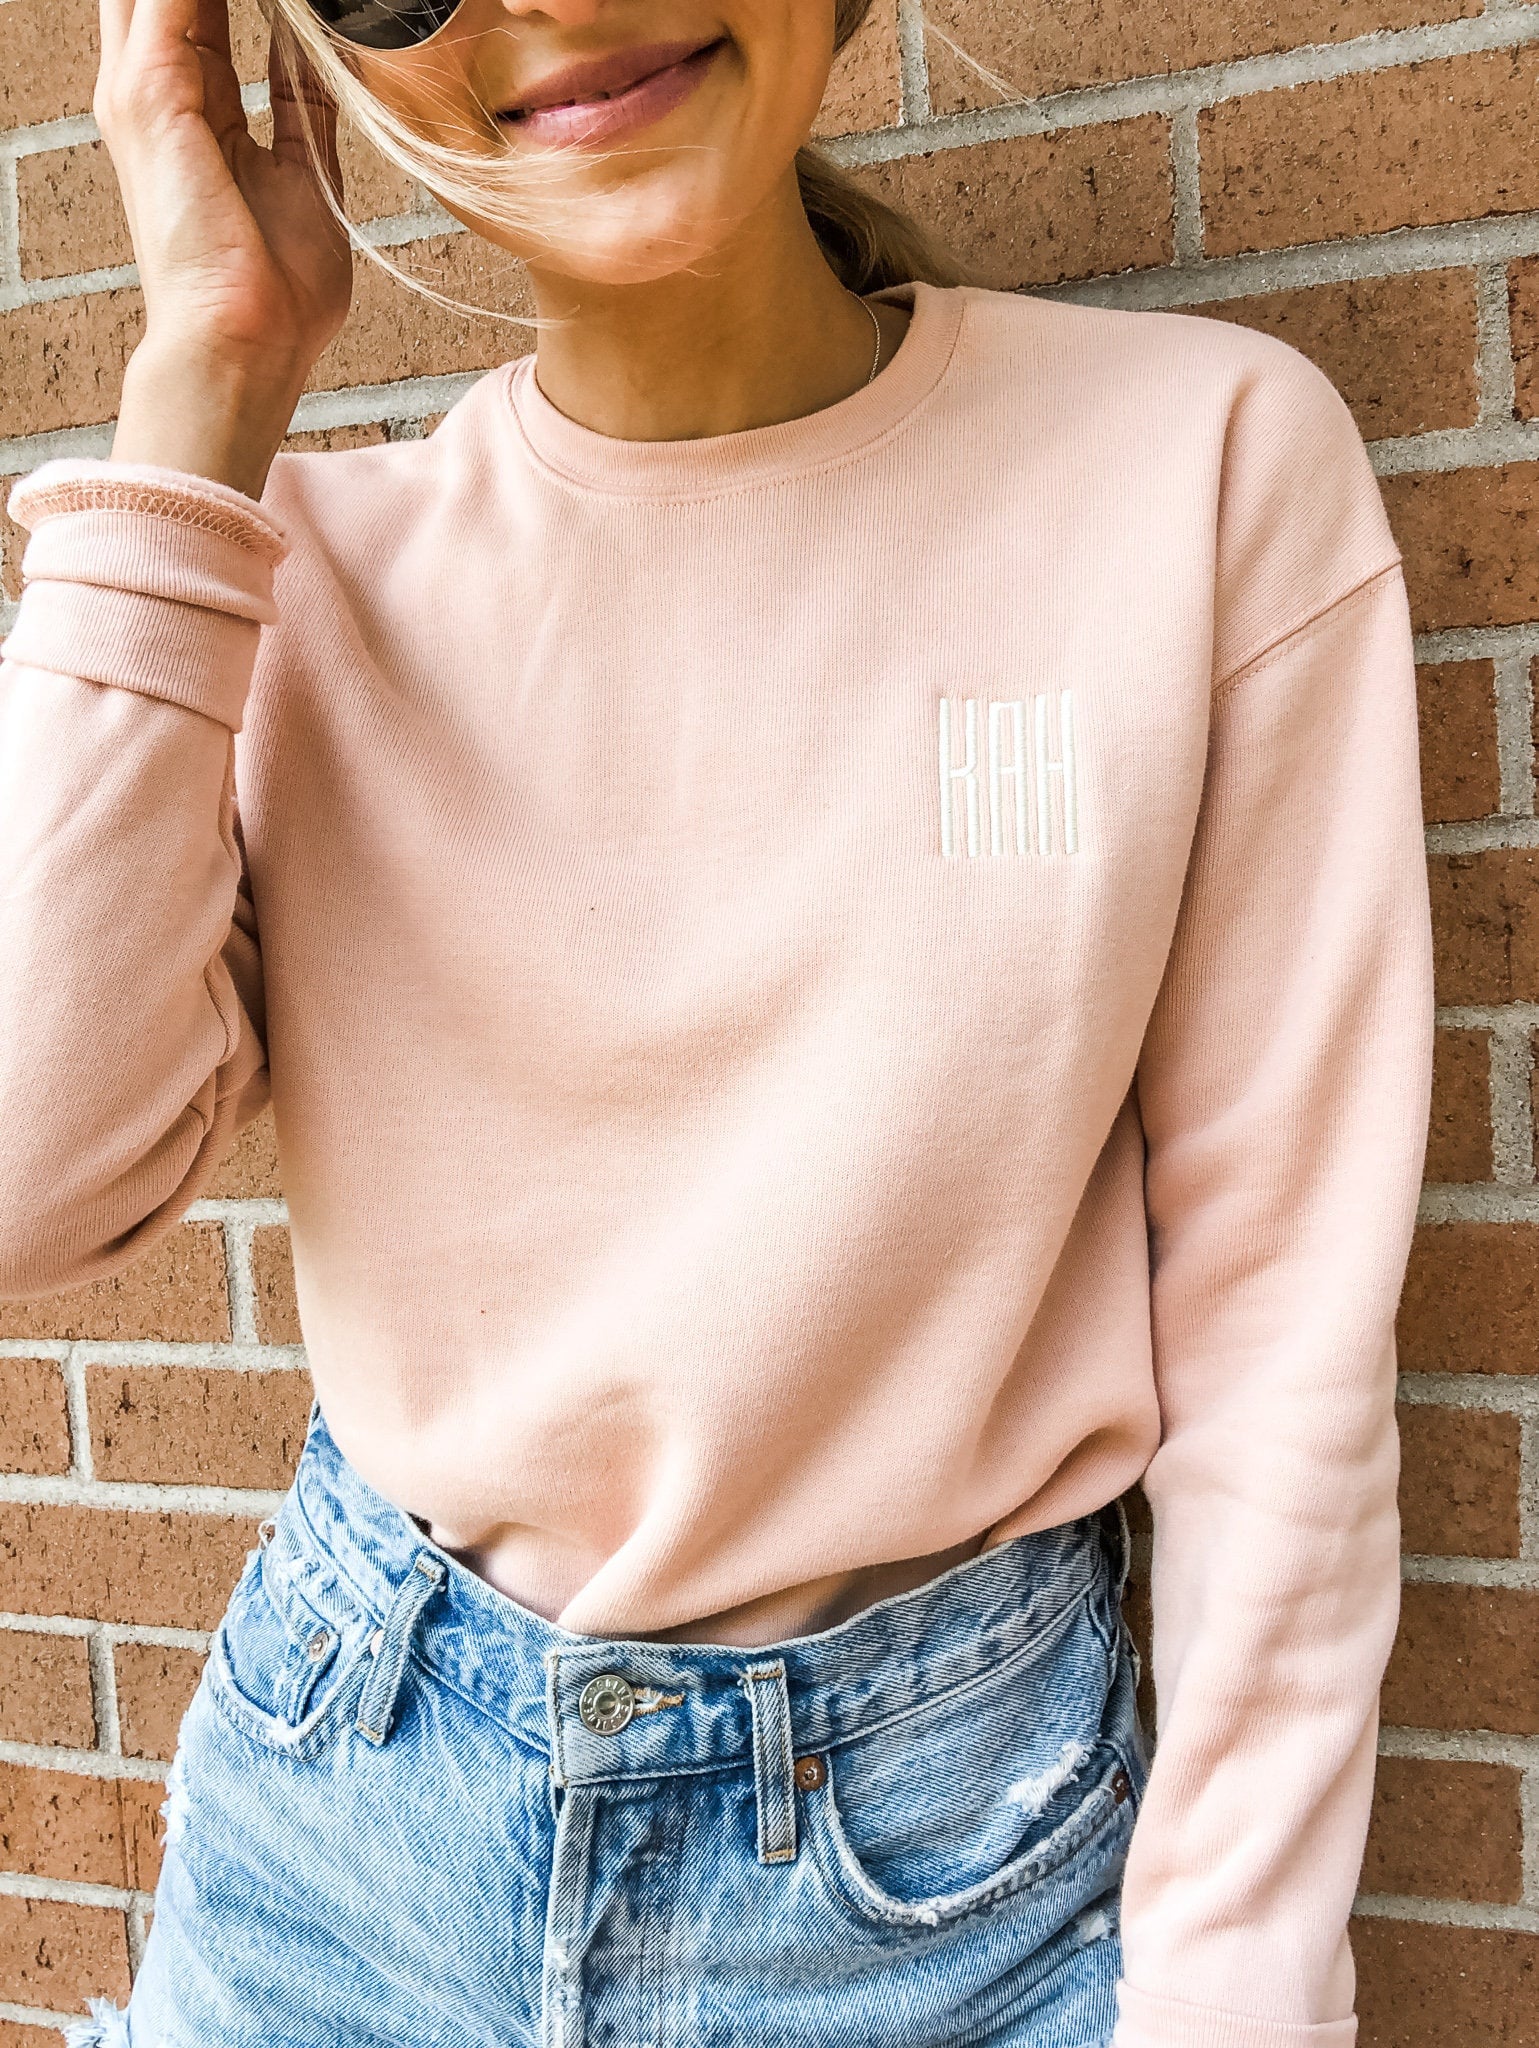 Popover Personalized Monogram Embroidered Crewneck Sweatshirt Initials Embroidered Crewneck Sweatshirt Pullover